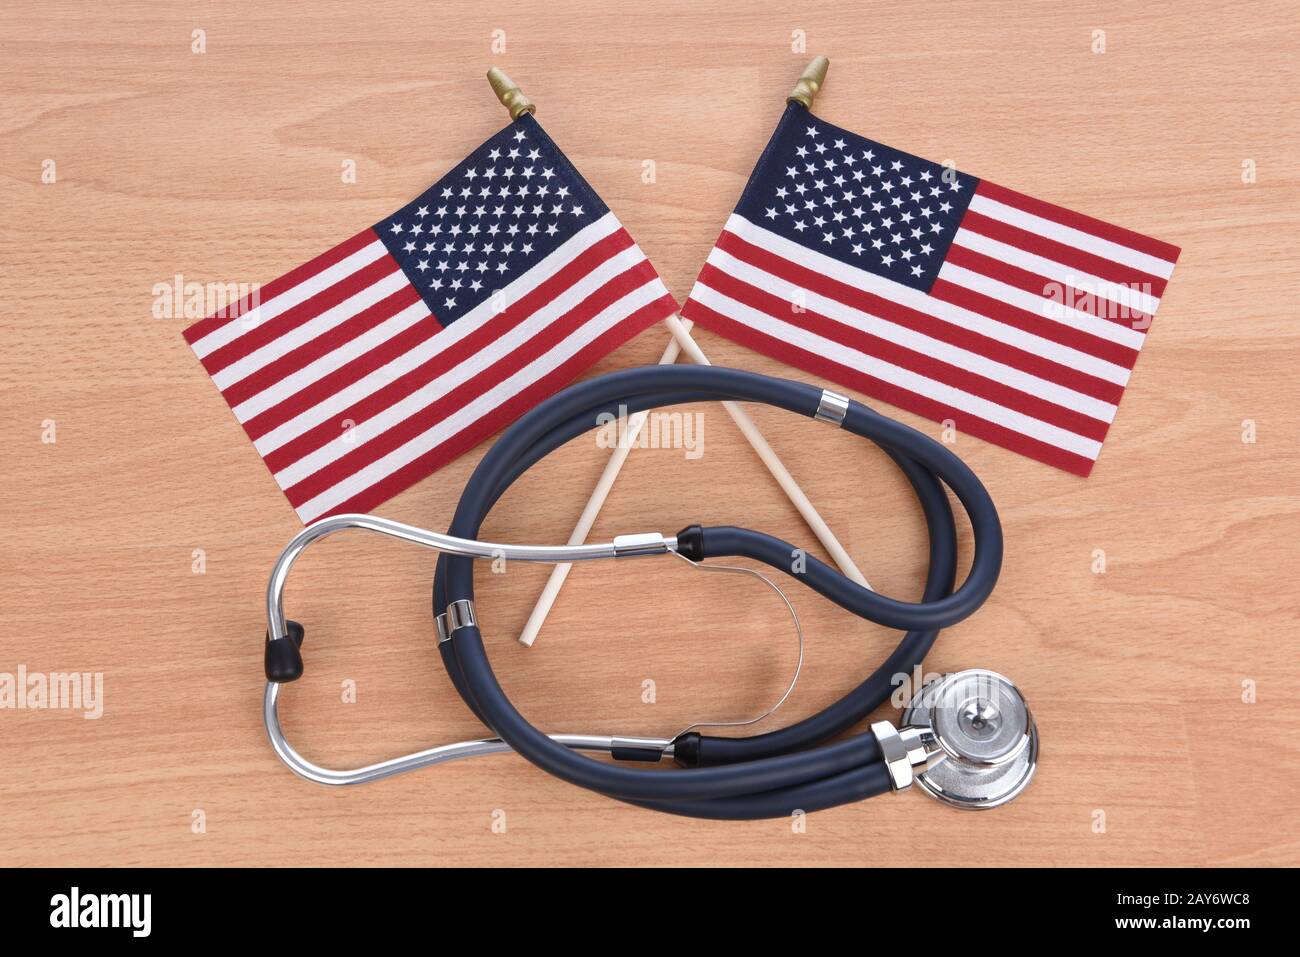 Military Health Care Concept. Light wood background with stethoscope and two crossed American flags. Stock Photo